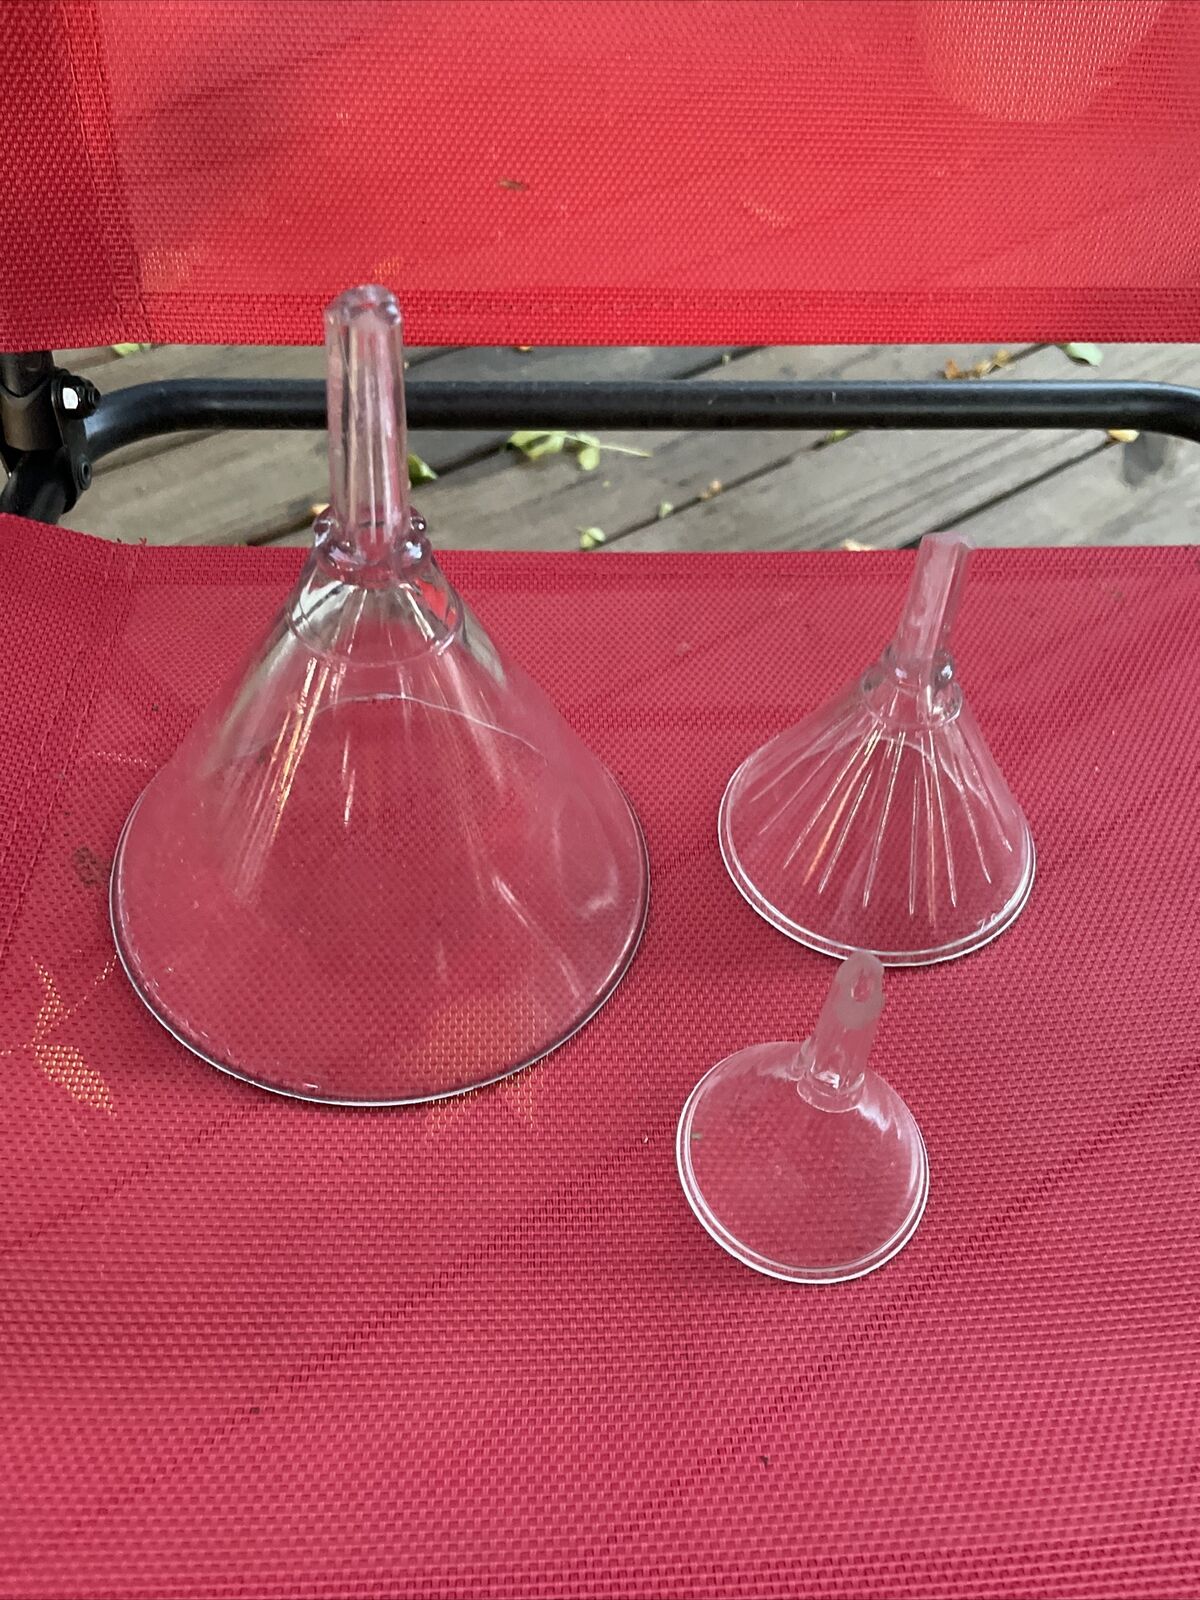 mooney airvent glass funnels